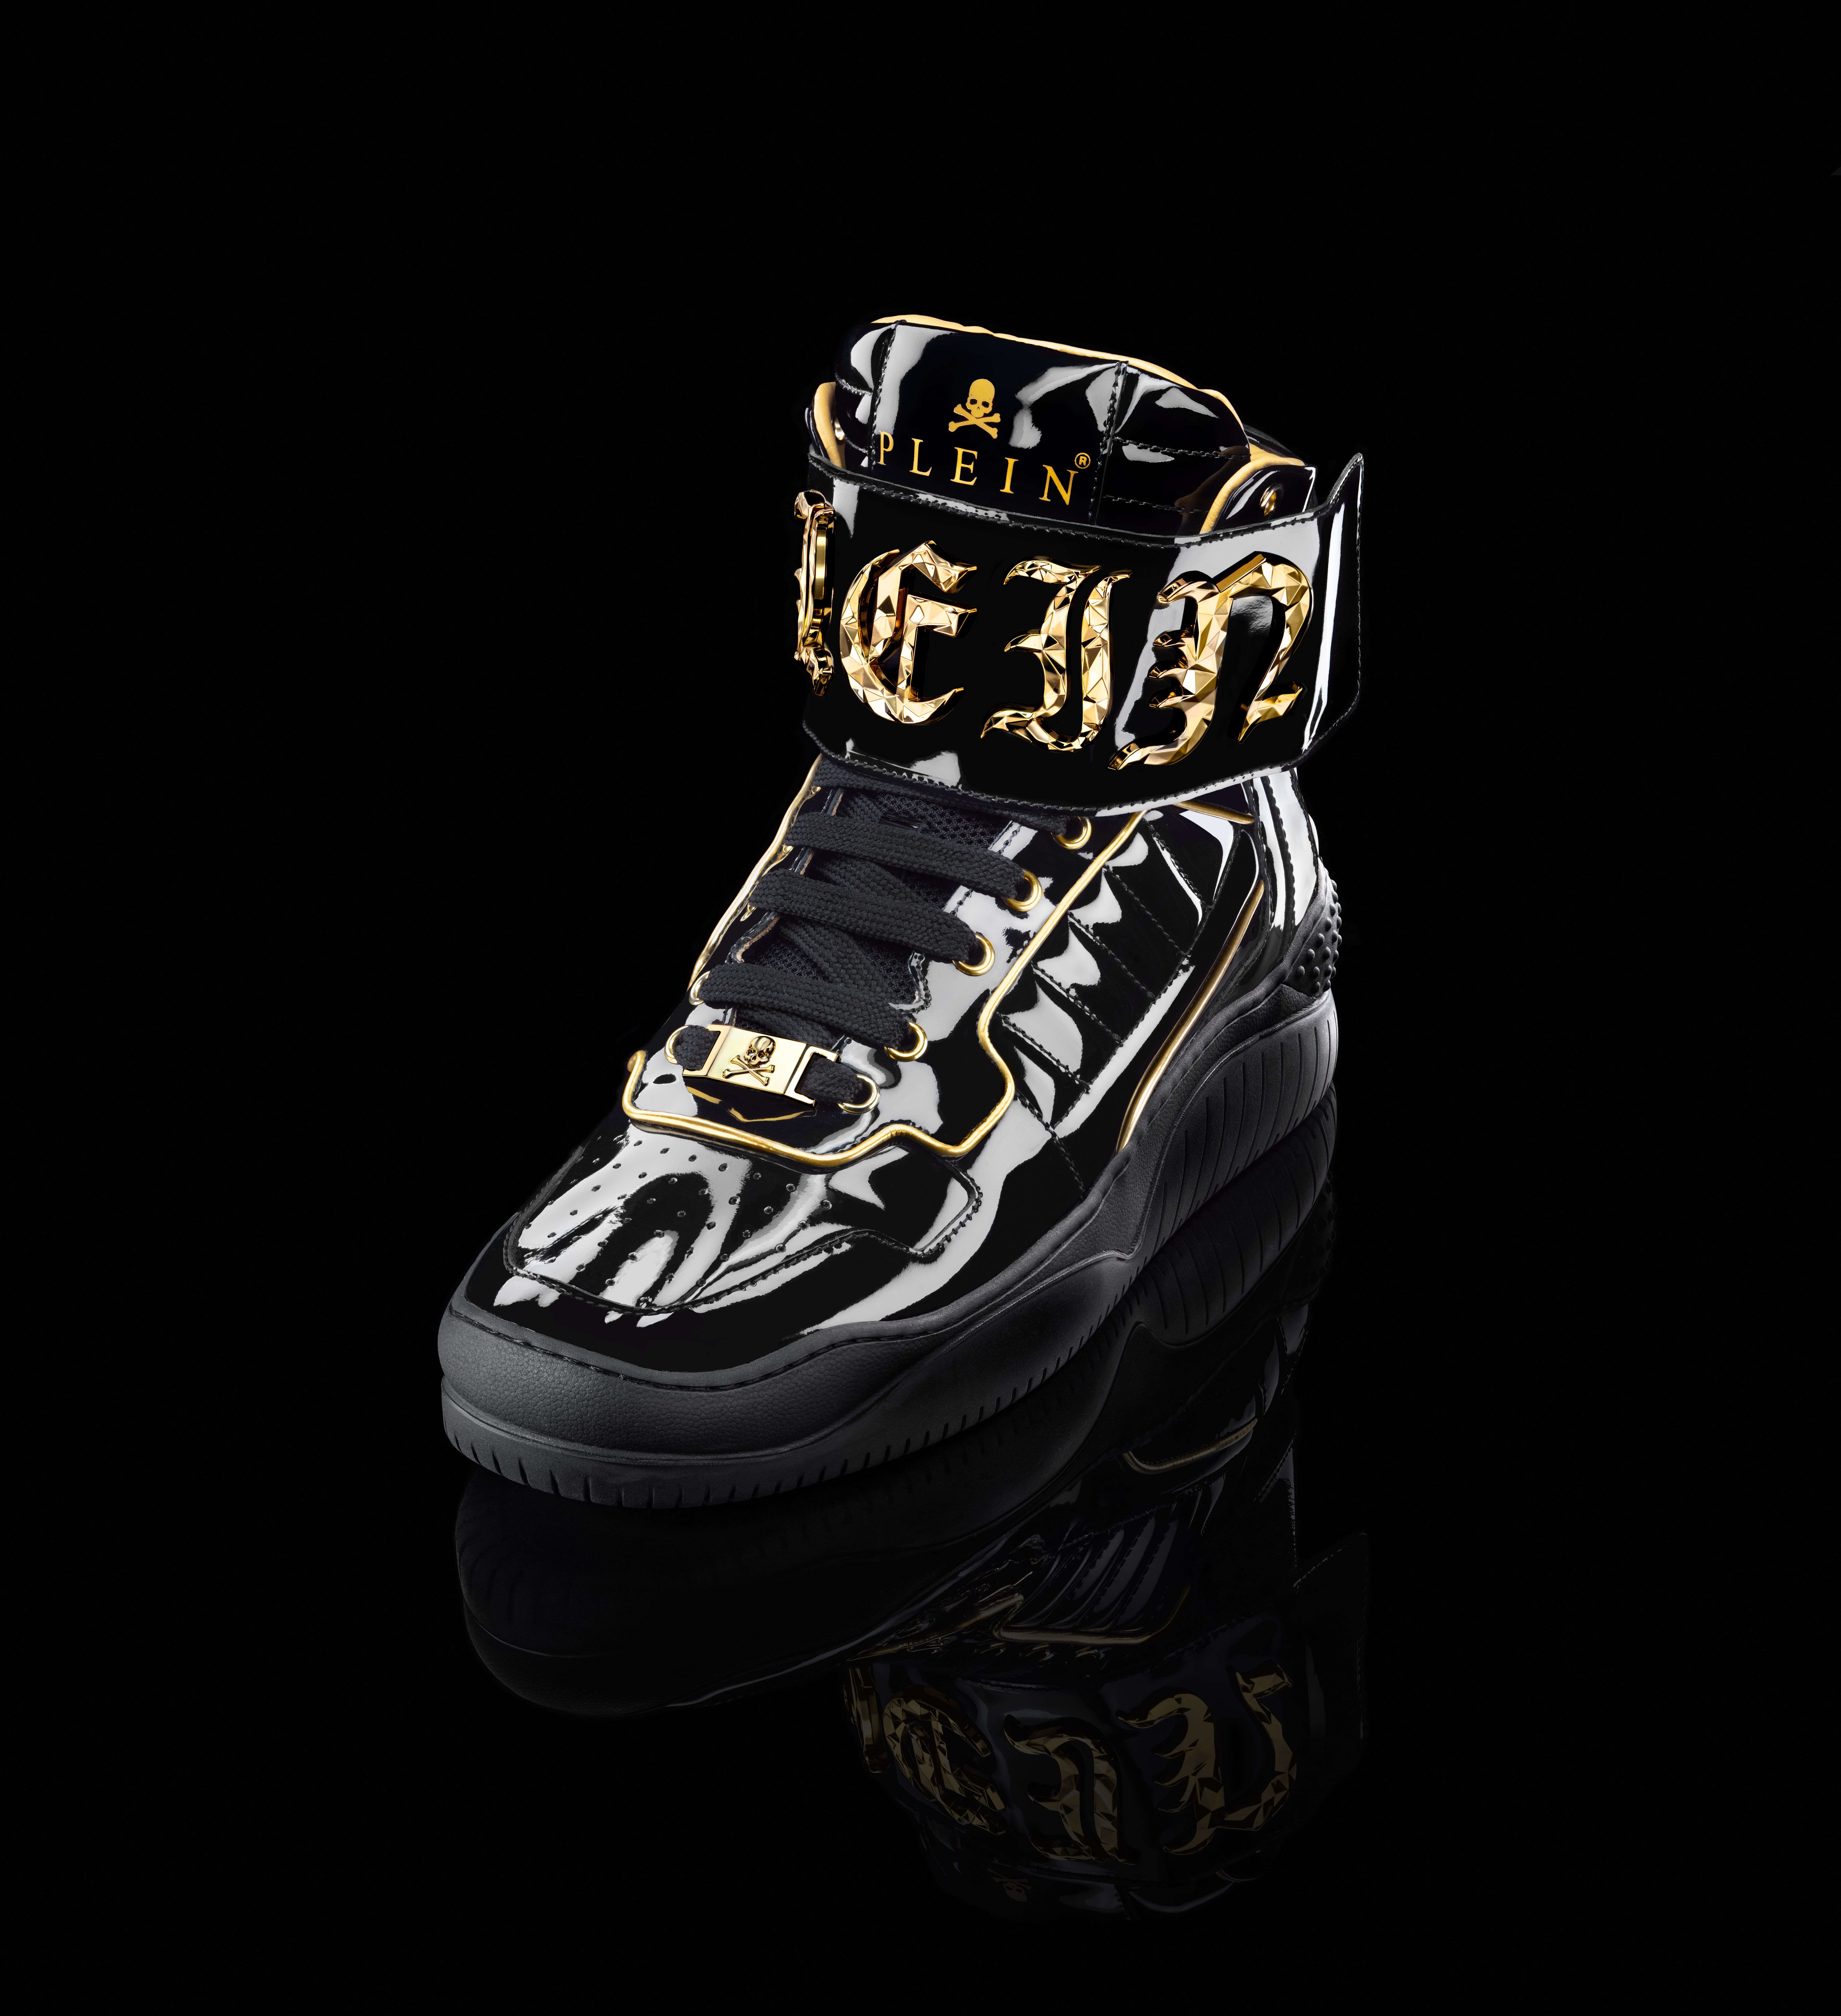 A Snoop Dogg and Philipp Plein shoe is shown